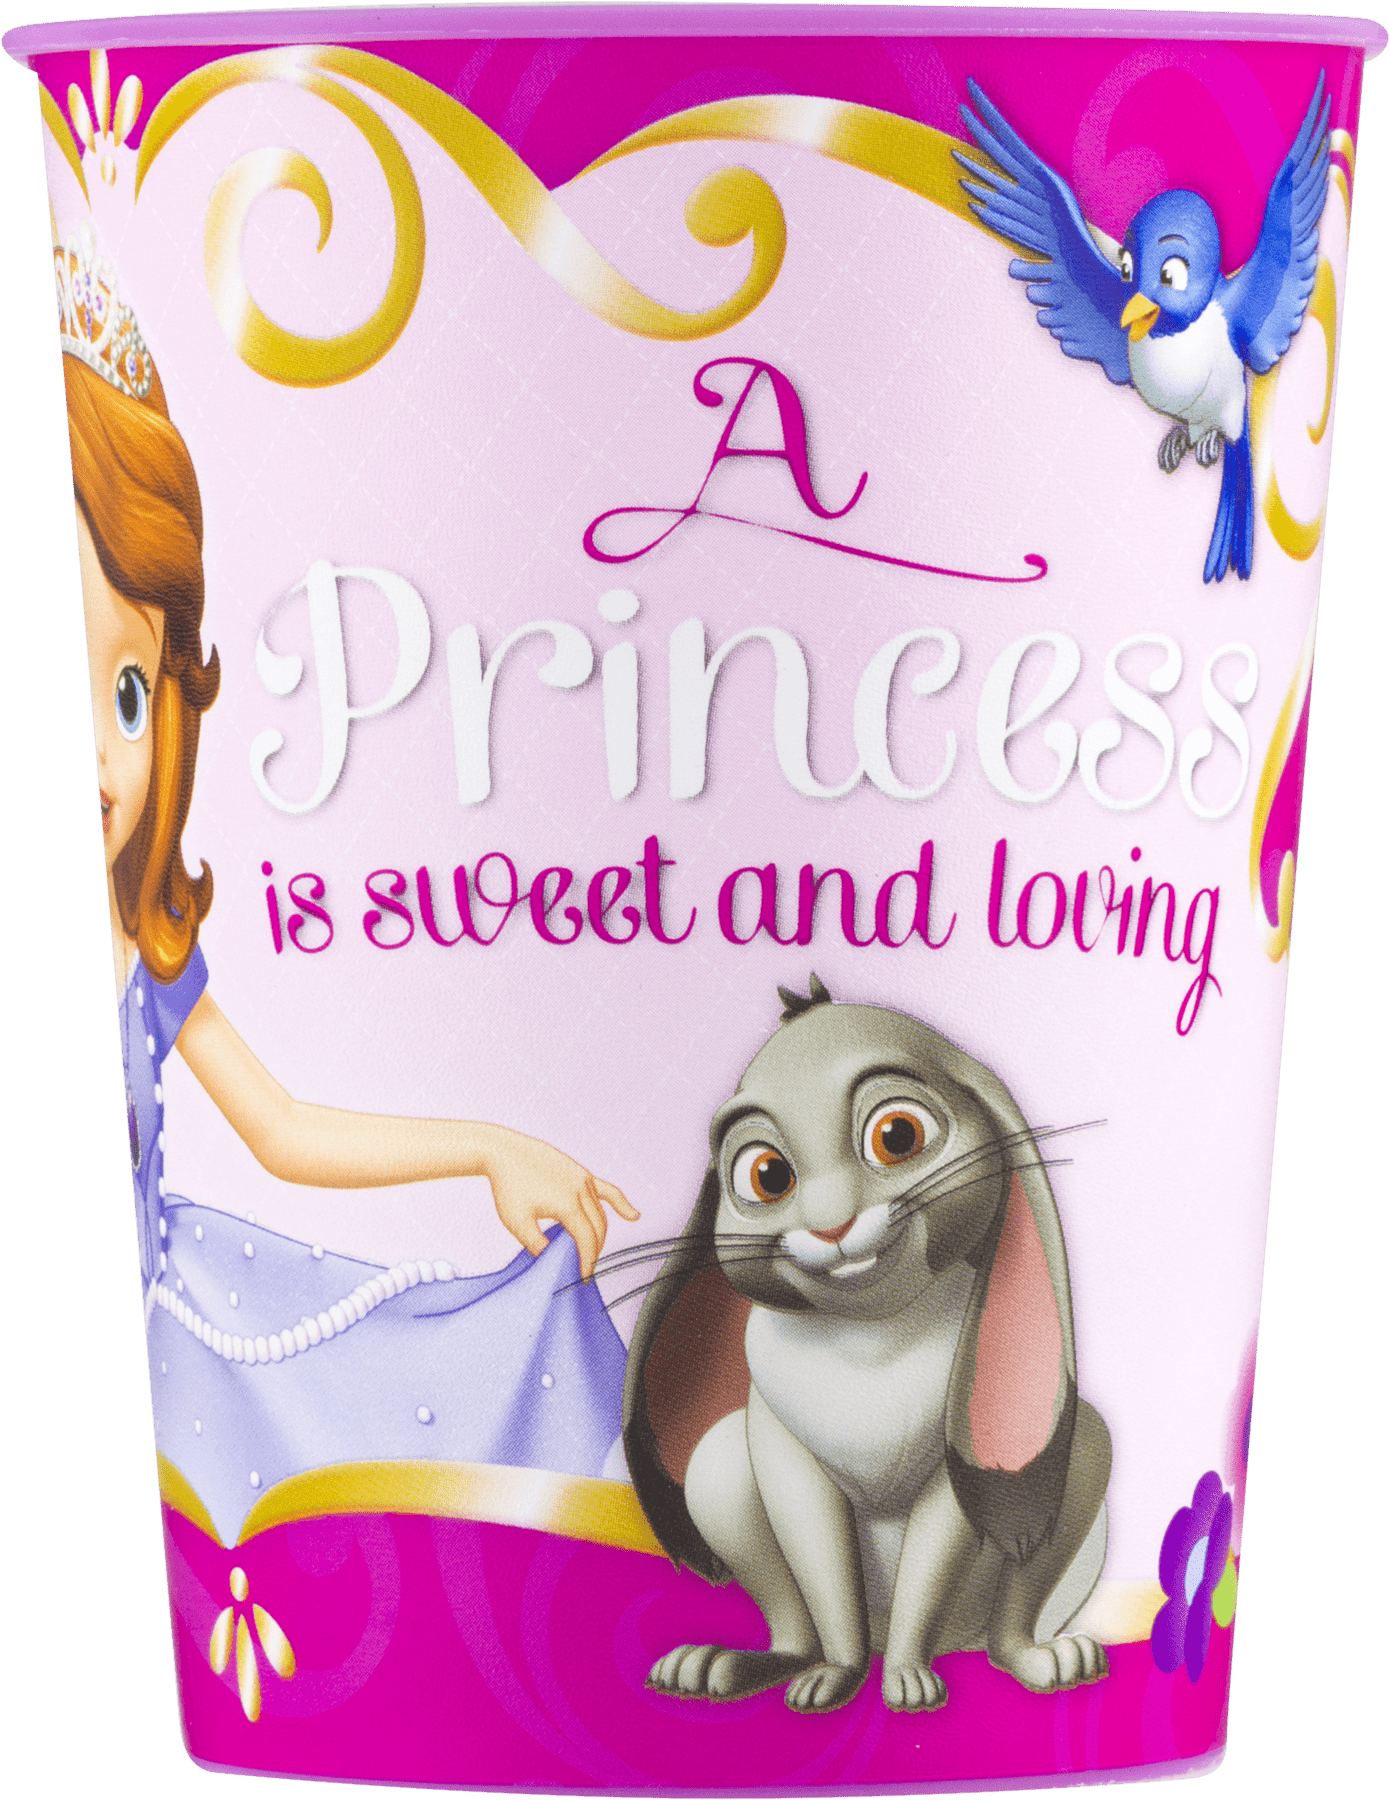 Toy Sofia the First Plastic Reusable Cup 16 Ounce 2-pack